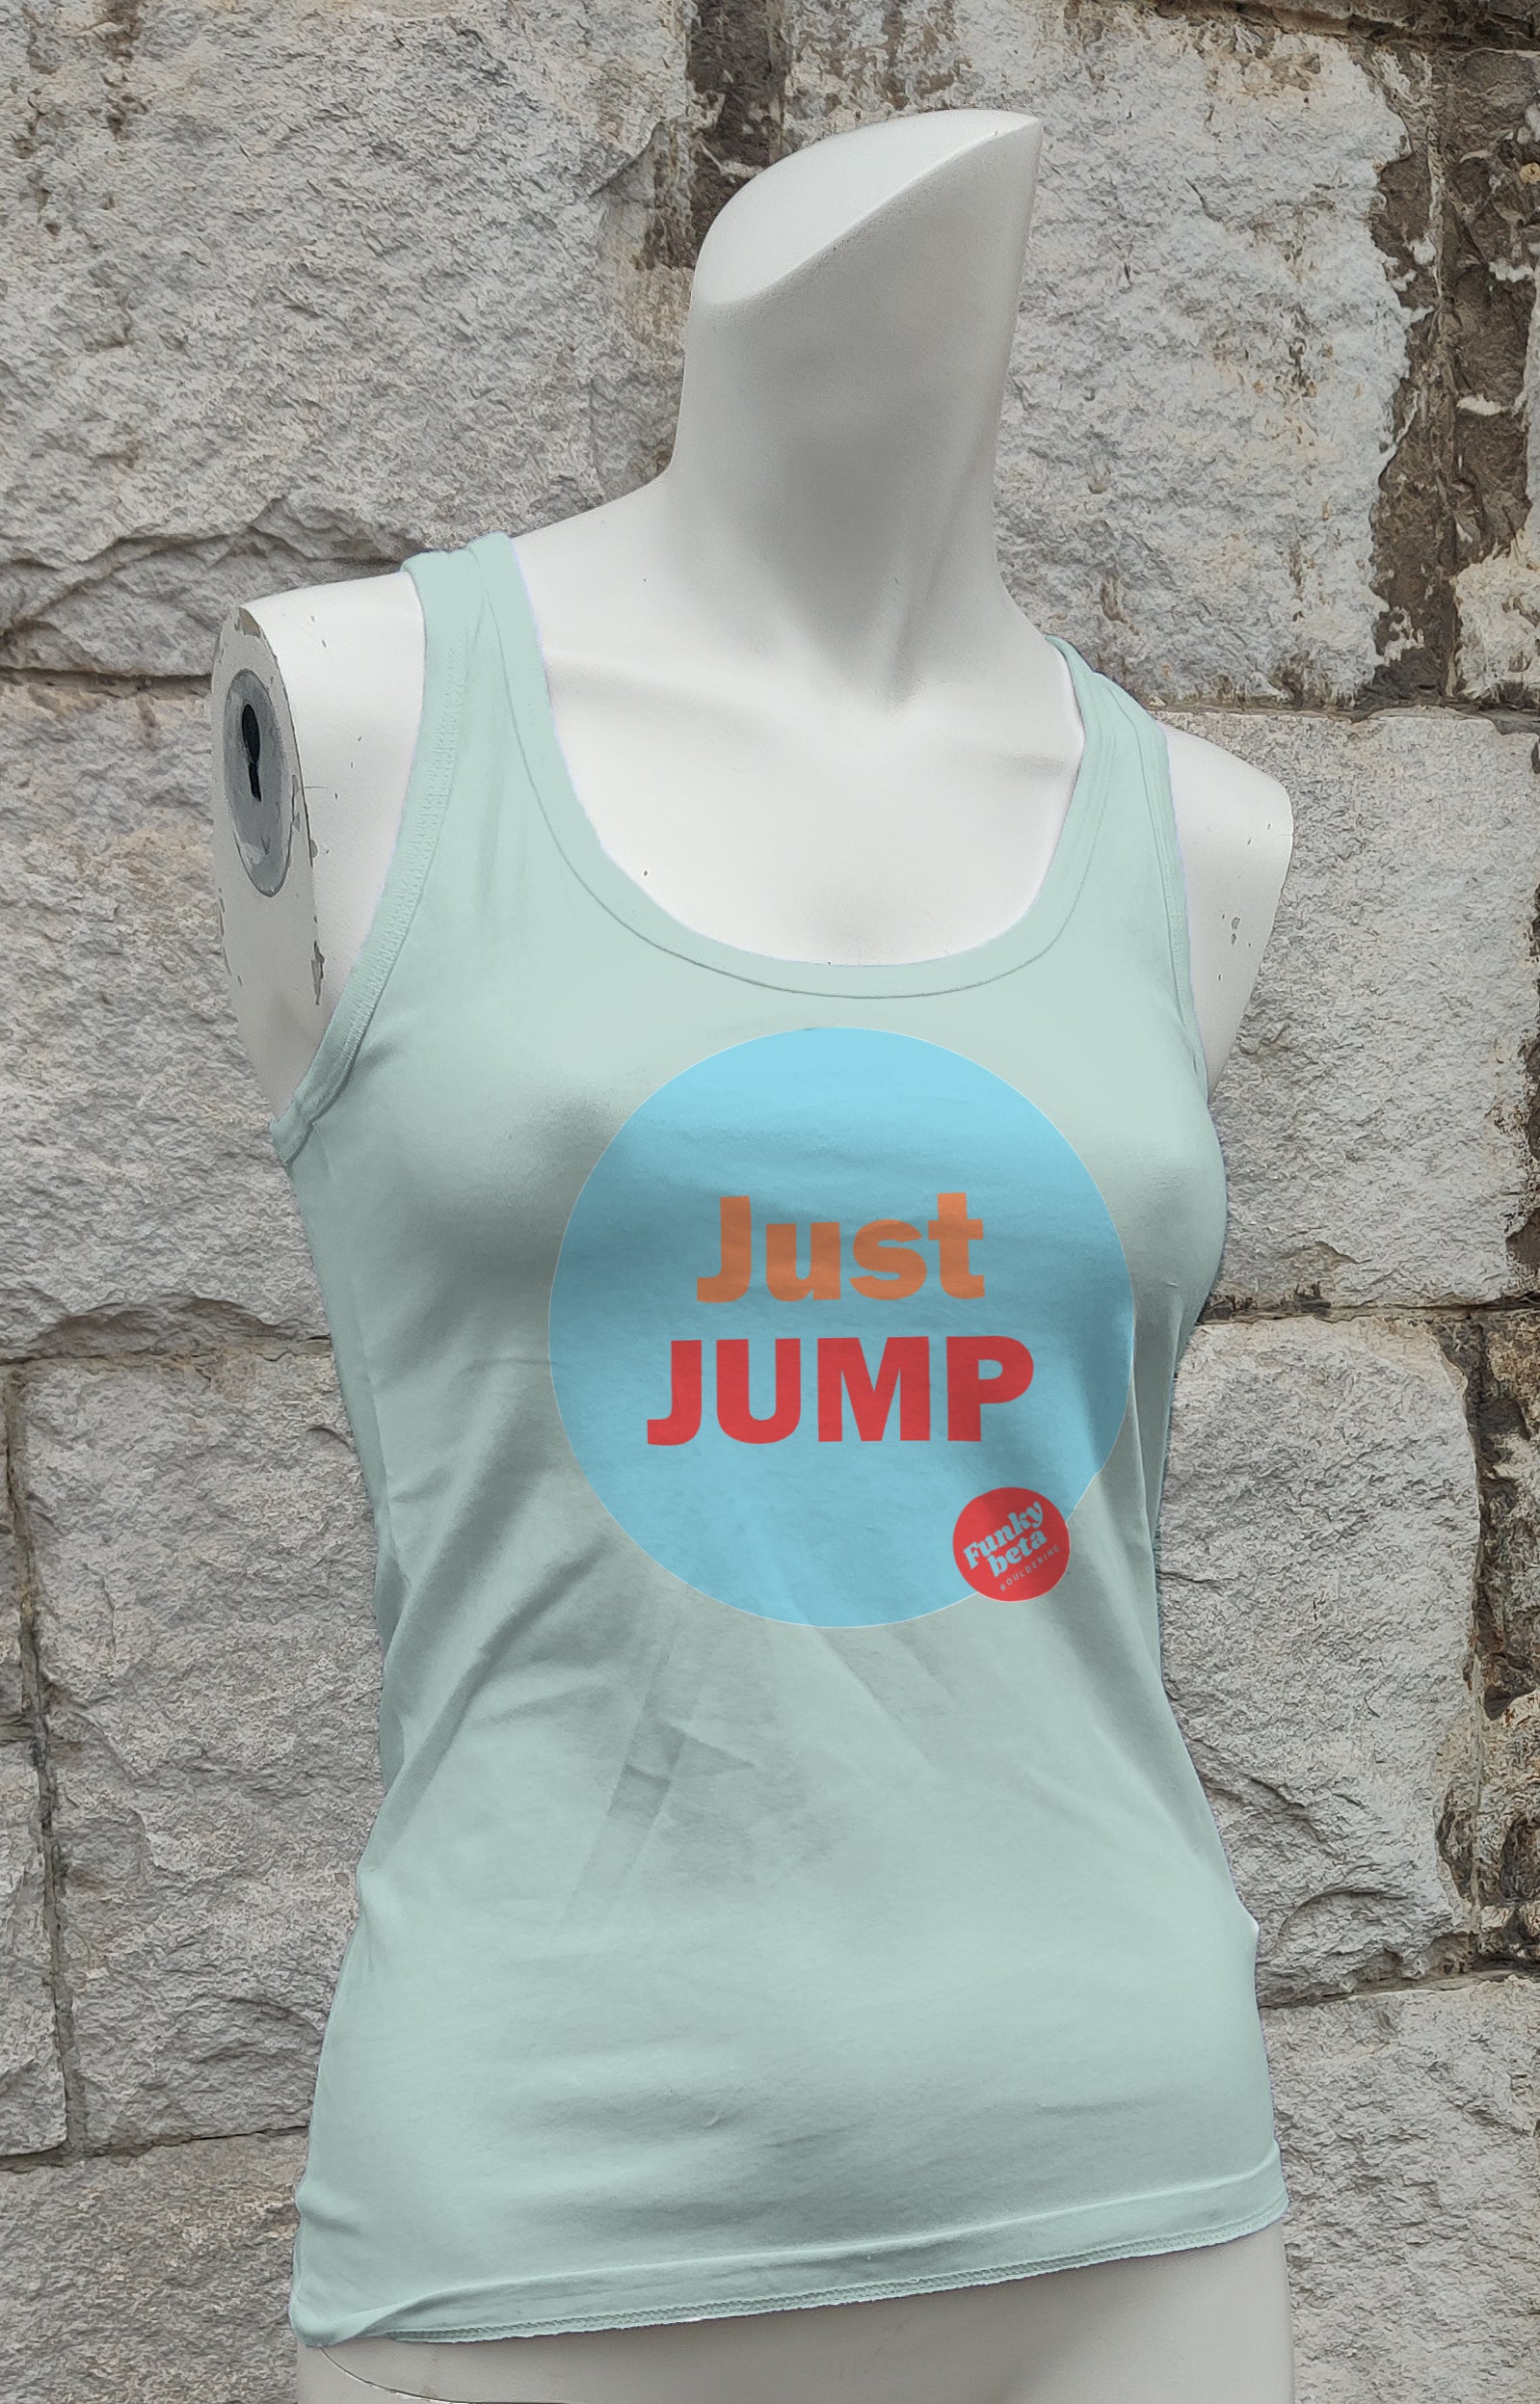 Just Jump - Climbing T-shirt for Ladies